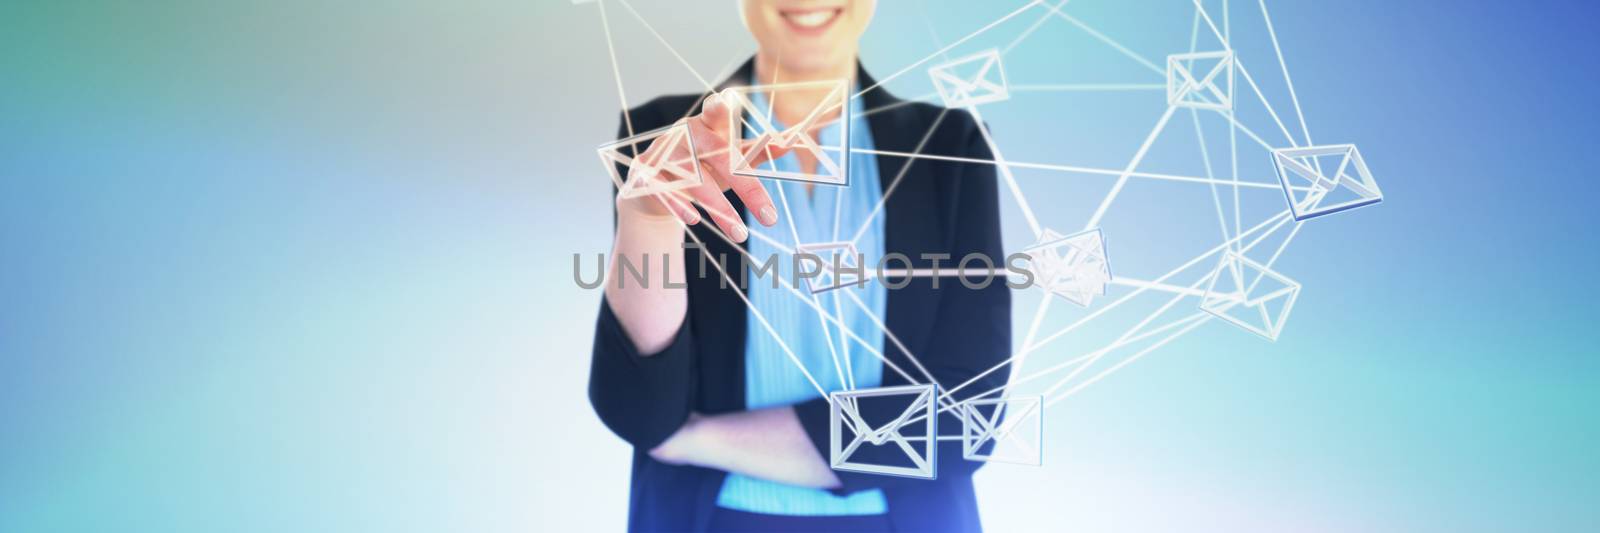 Mid section of smiling businesswoman pointing against abstract blue background